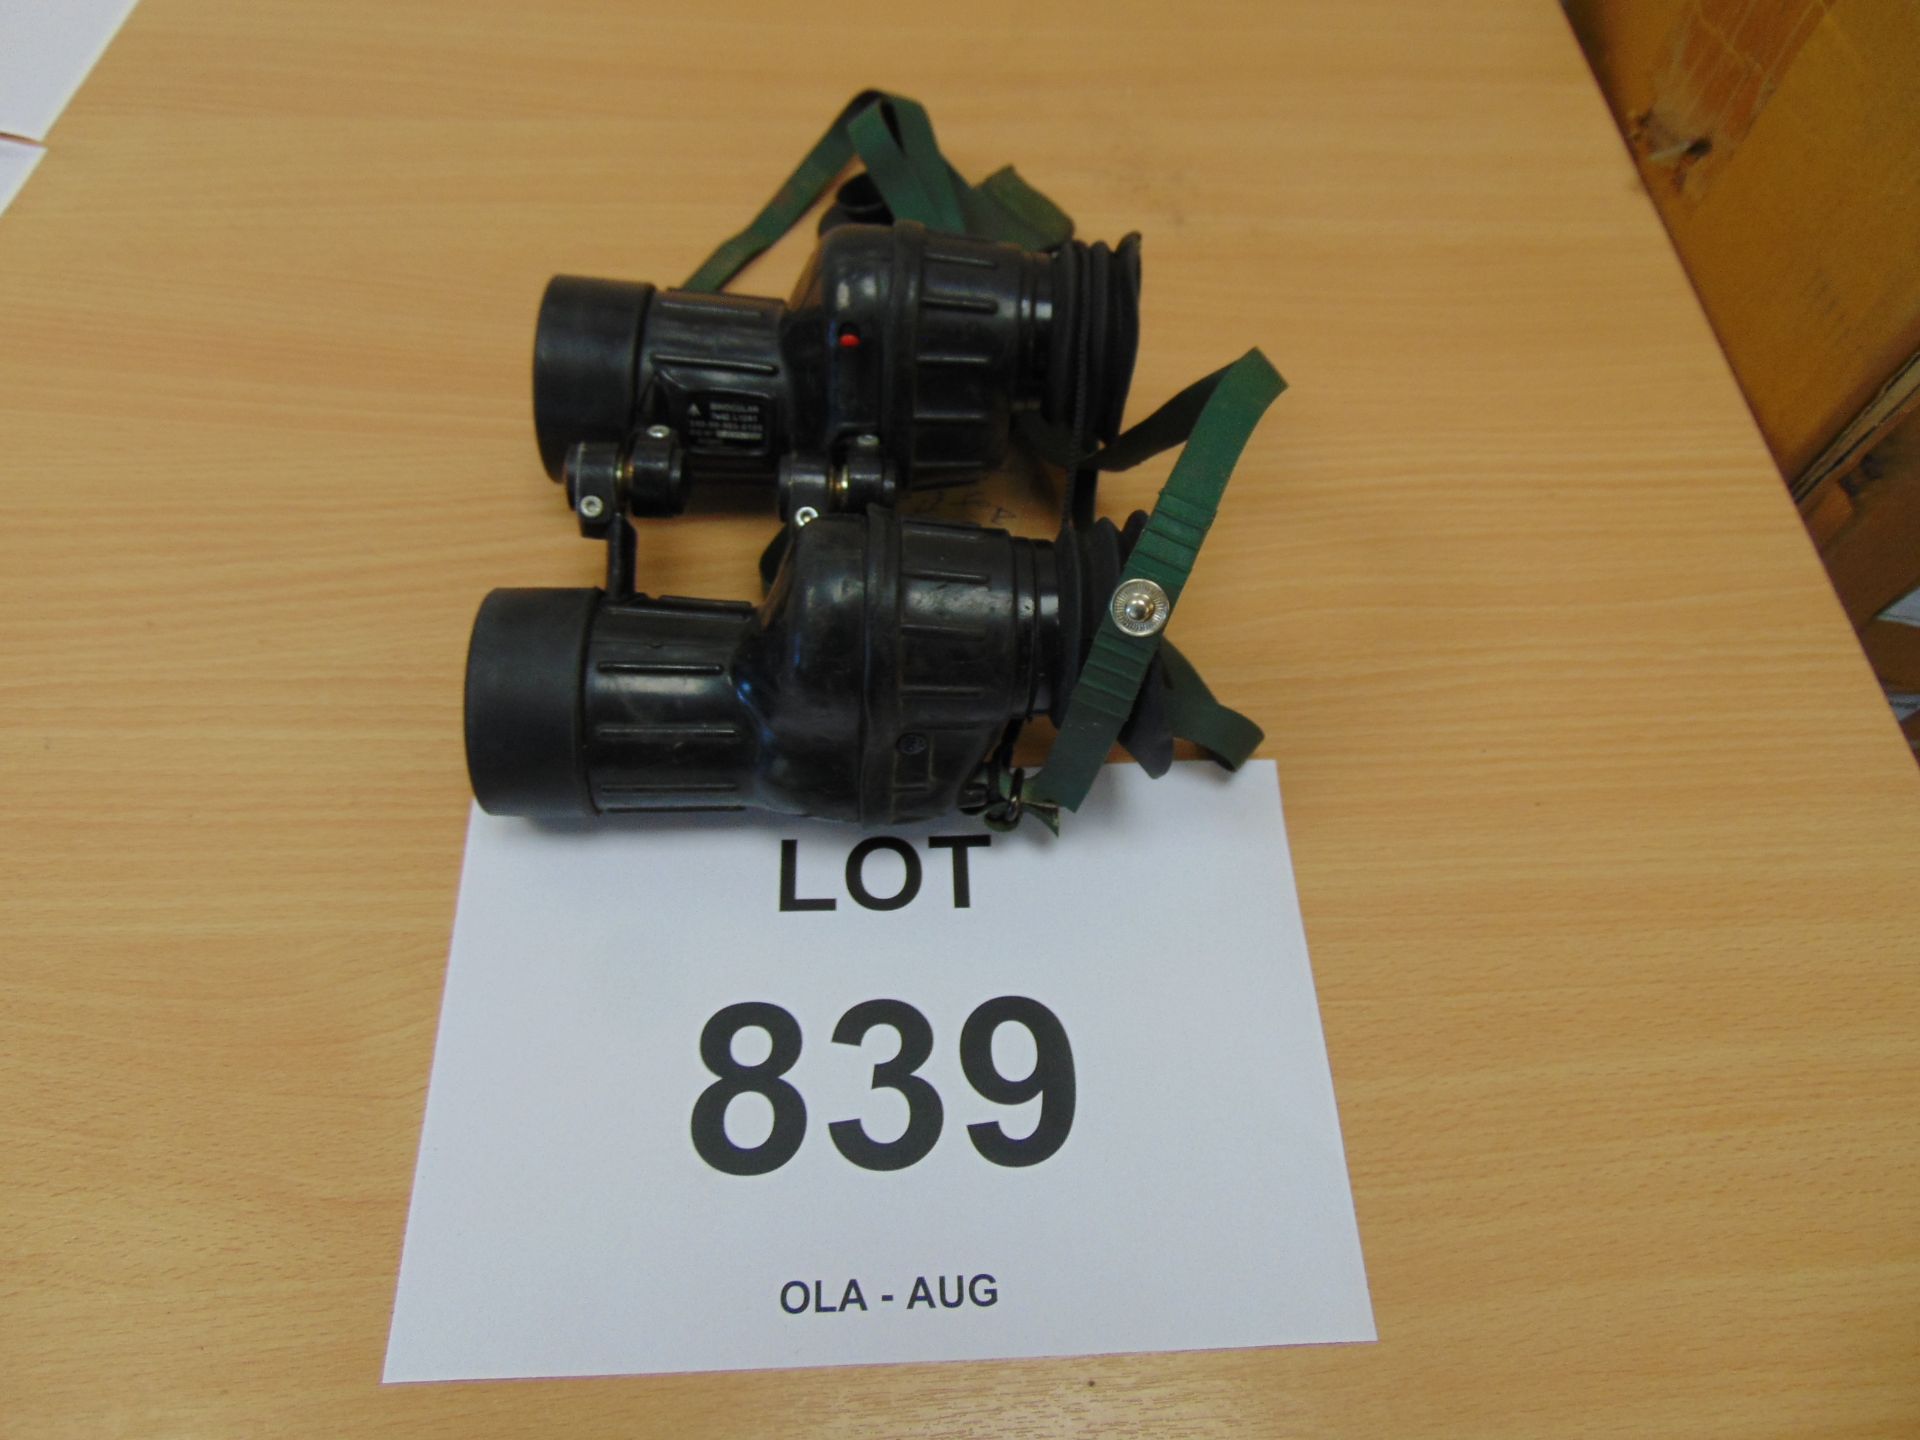 1 x Pair of Avimo L12A1 Self Focusing British Army Binos with graticule in mils 7x42 c/w filters - Image 5 of 5